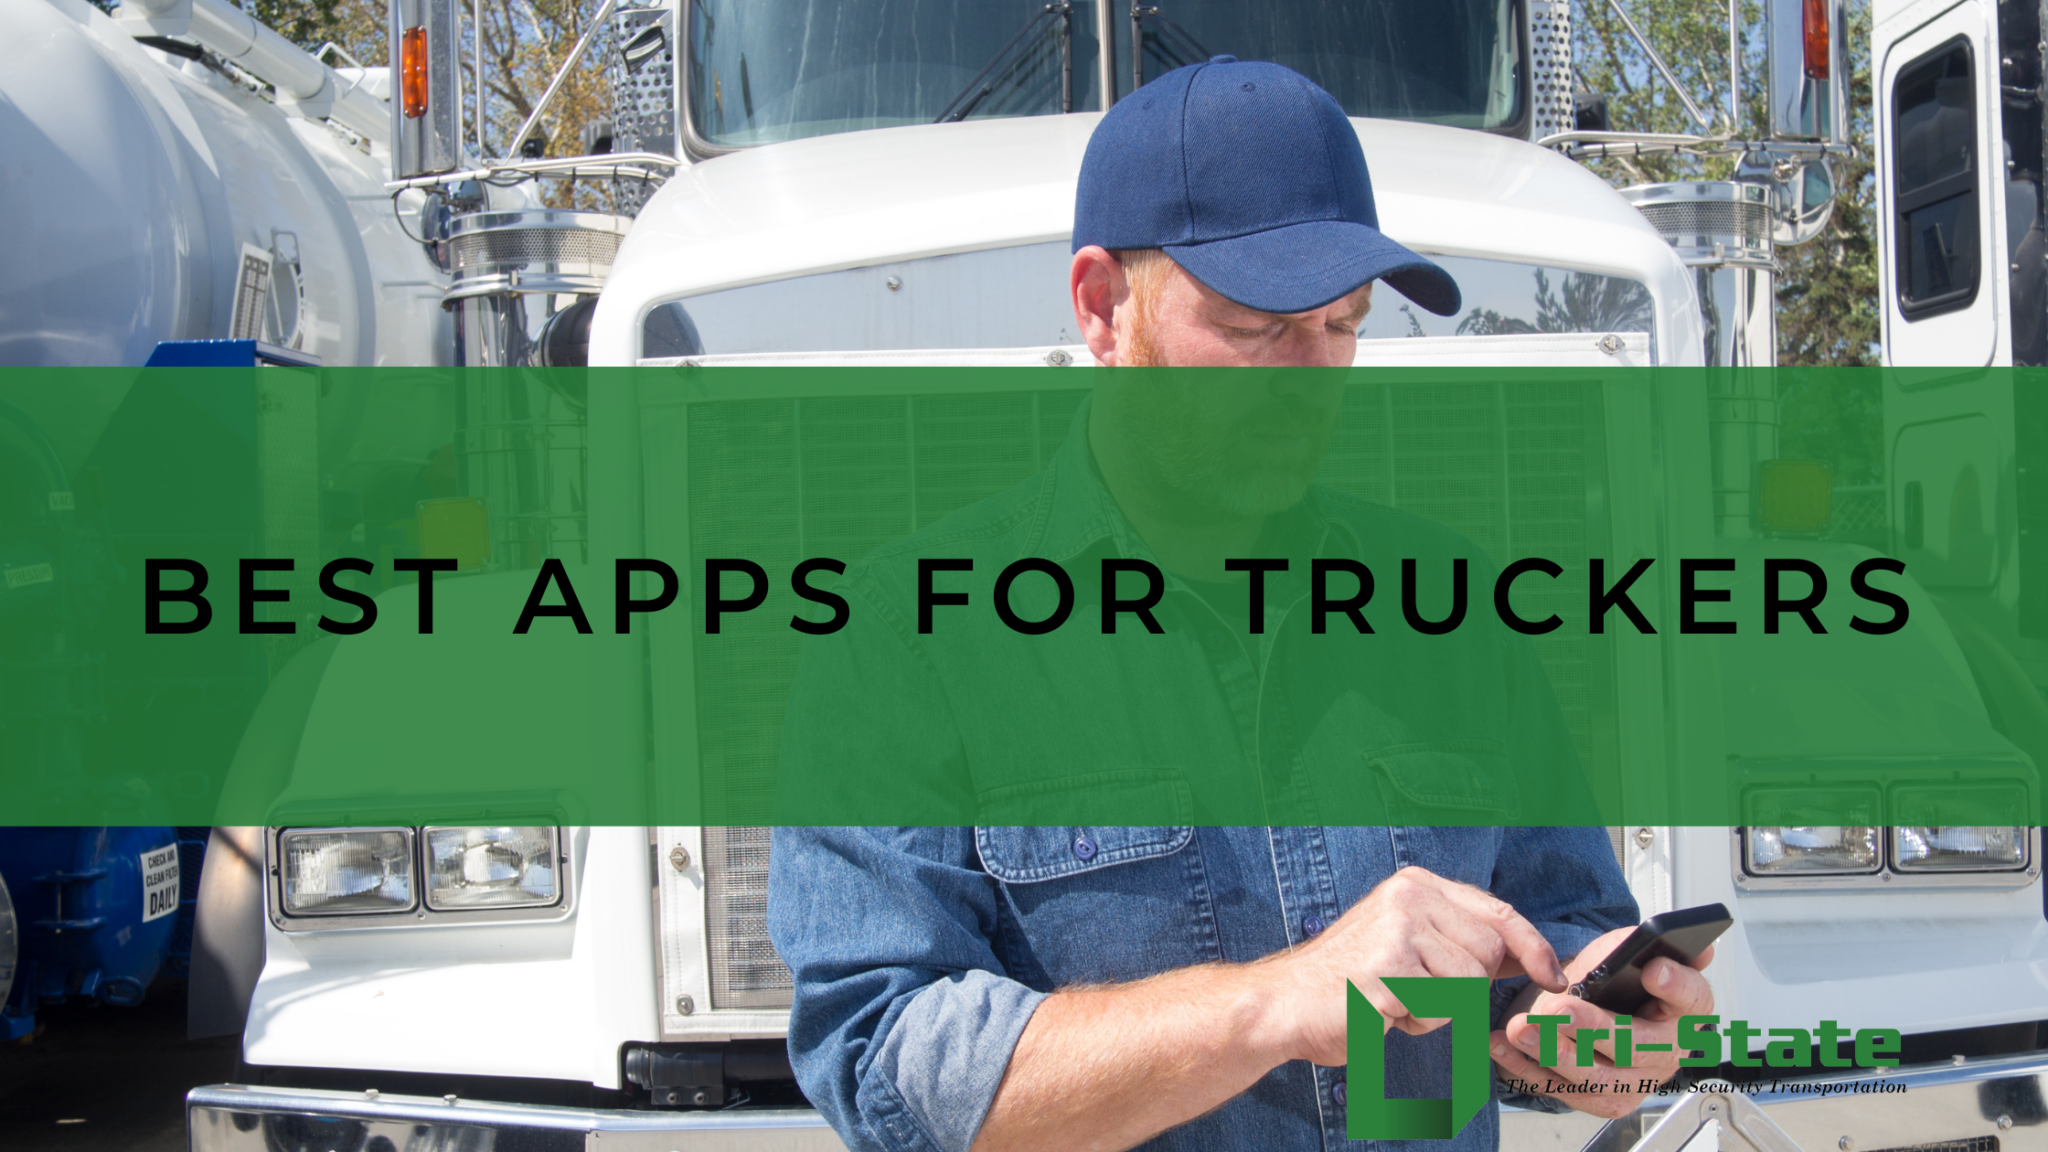 Prepare for Emergencies: Key Items for Truck Drivers